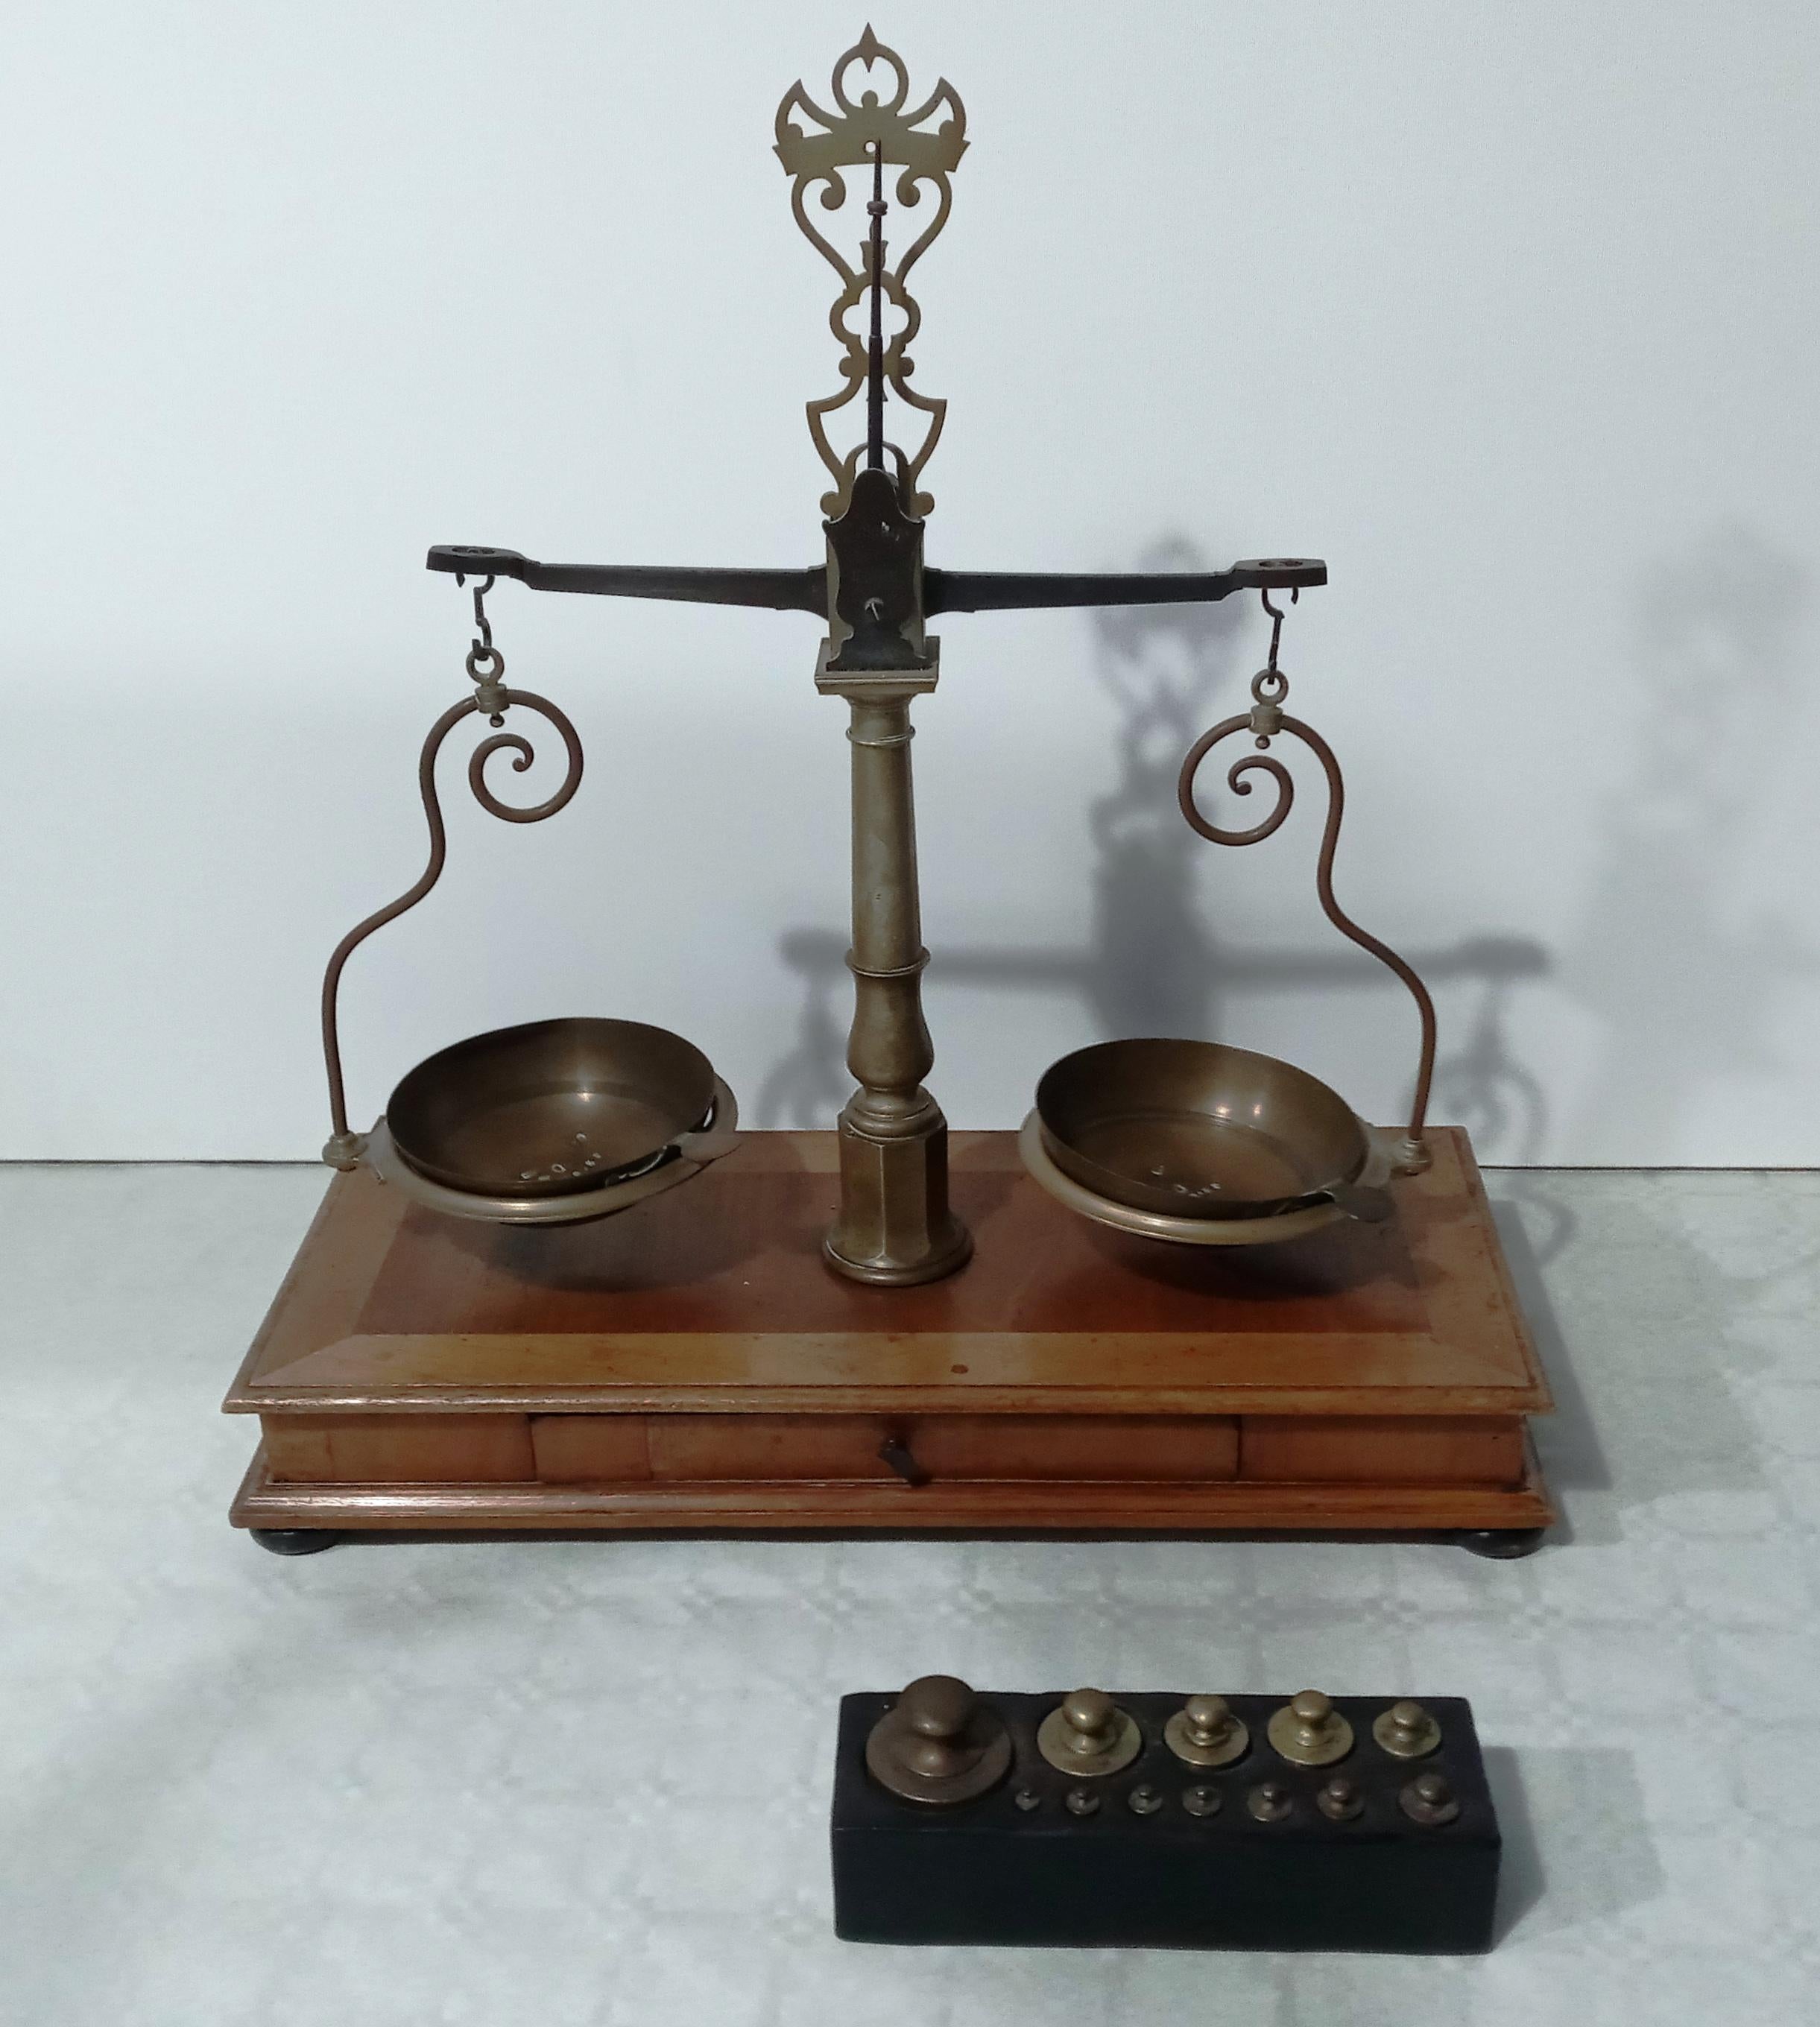 Precision apothecary scale, 1940s-1950s. Wooden base with drawer, brass instruments. Original set of weights included. Functioning.